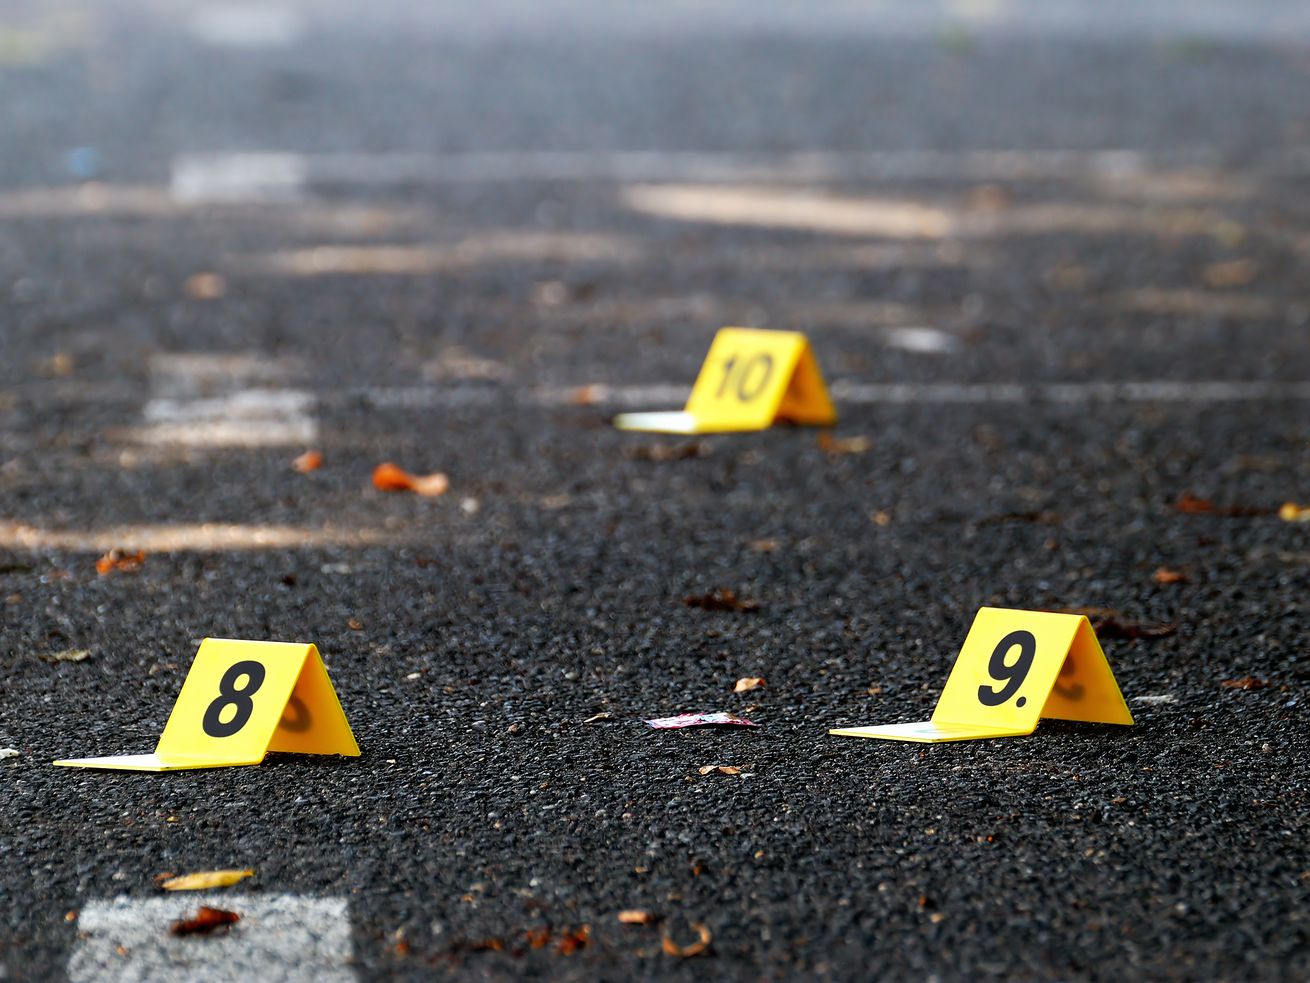 In five reported incidents, six people were injured in shootings across the city.